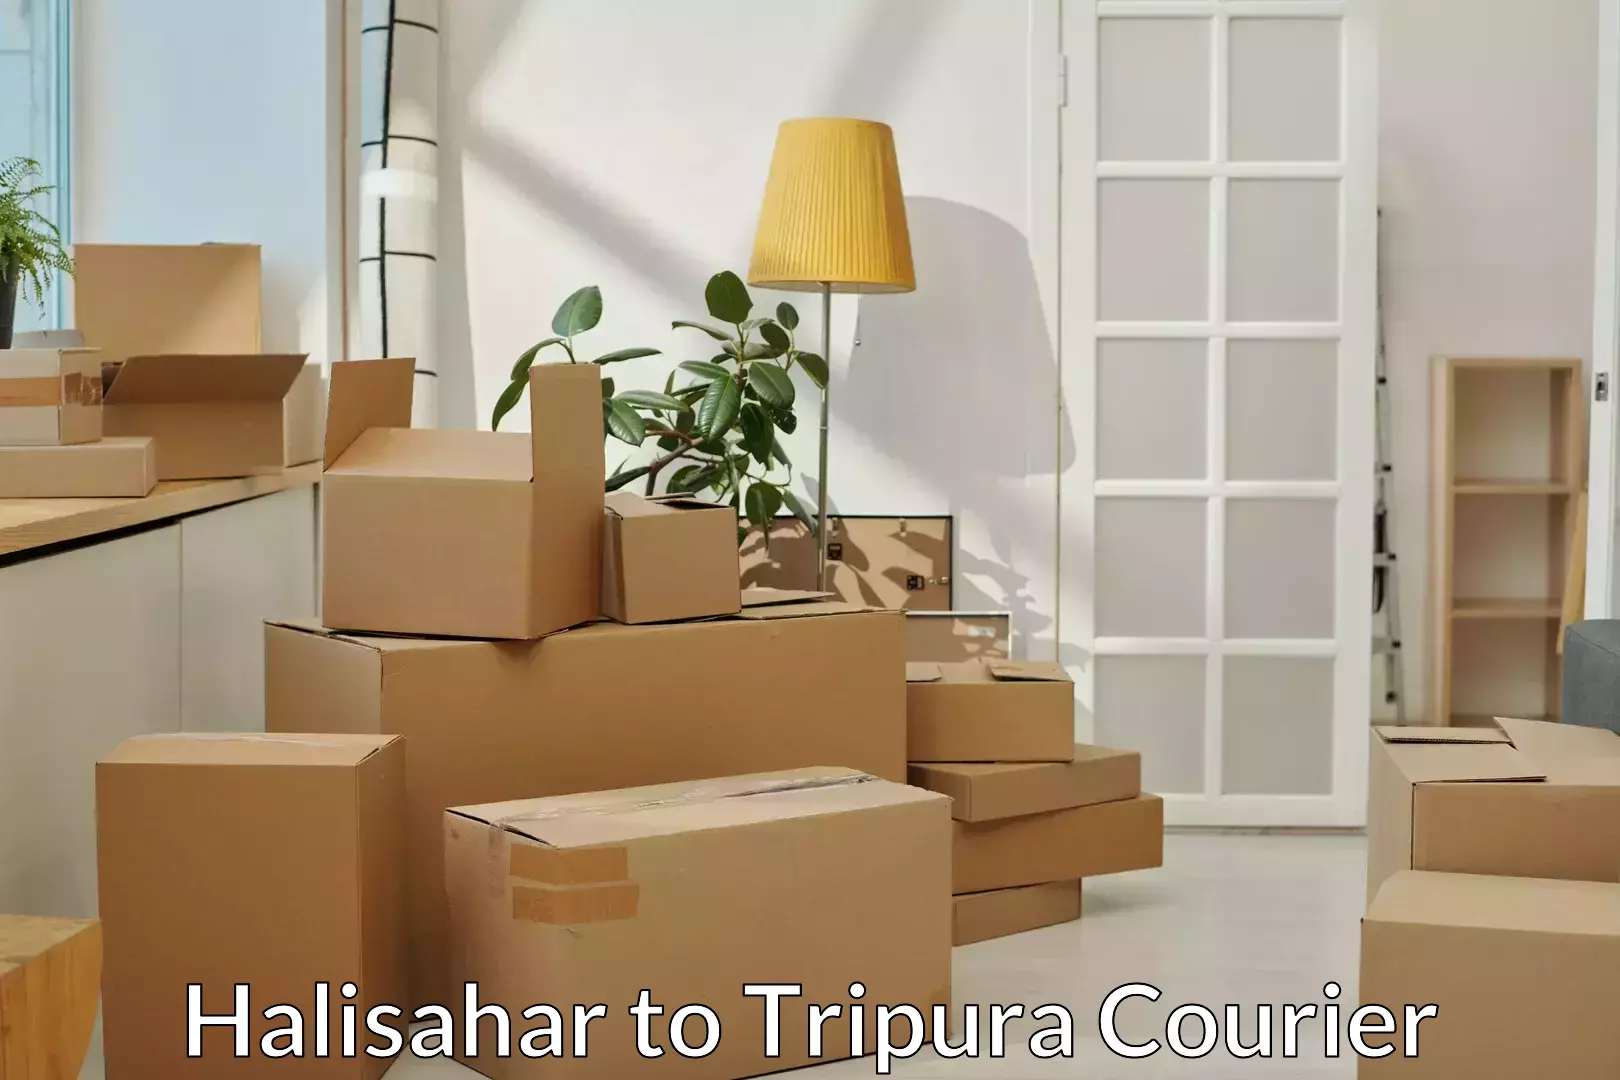 Professional moving assistance in Halisahar to Agartala